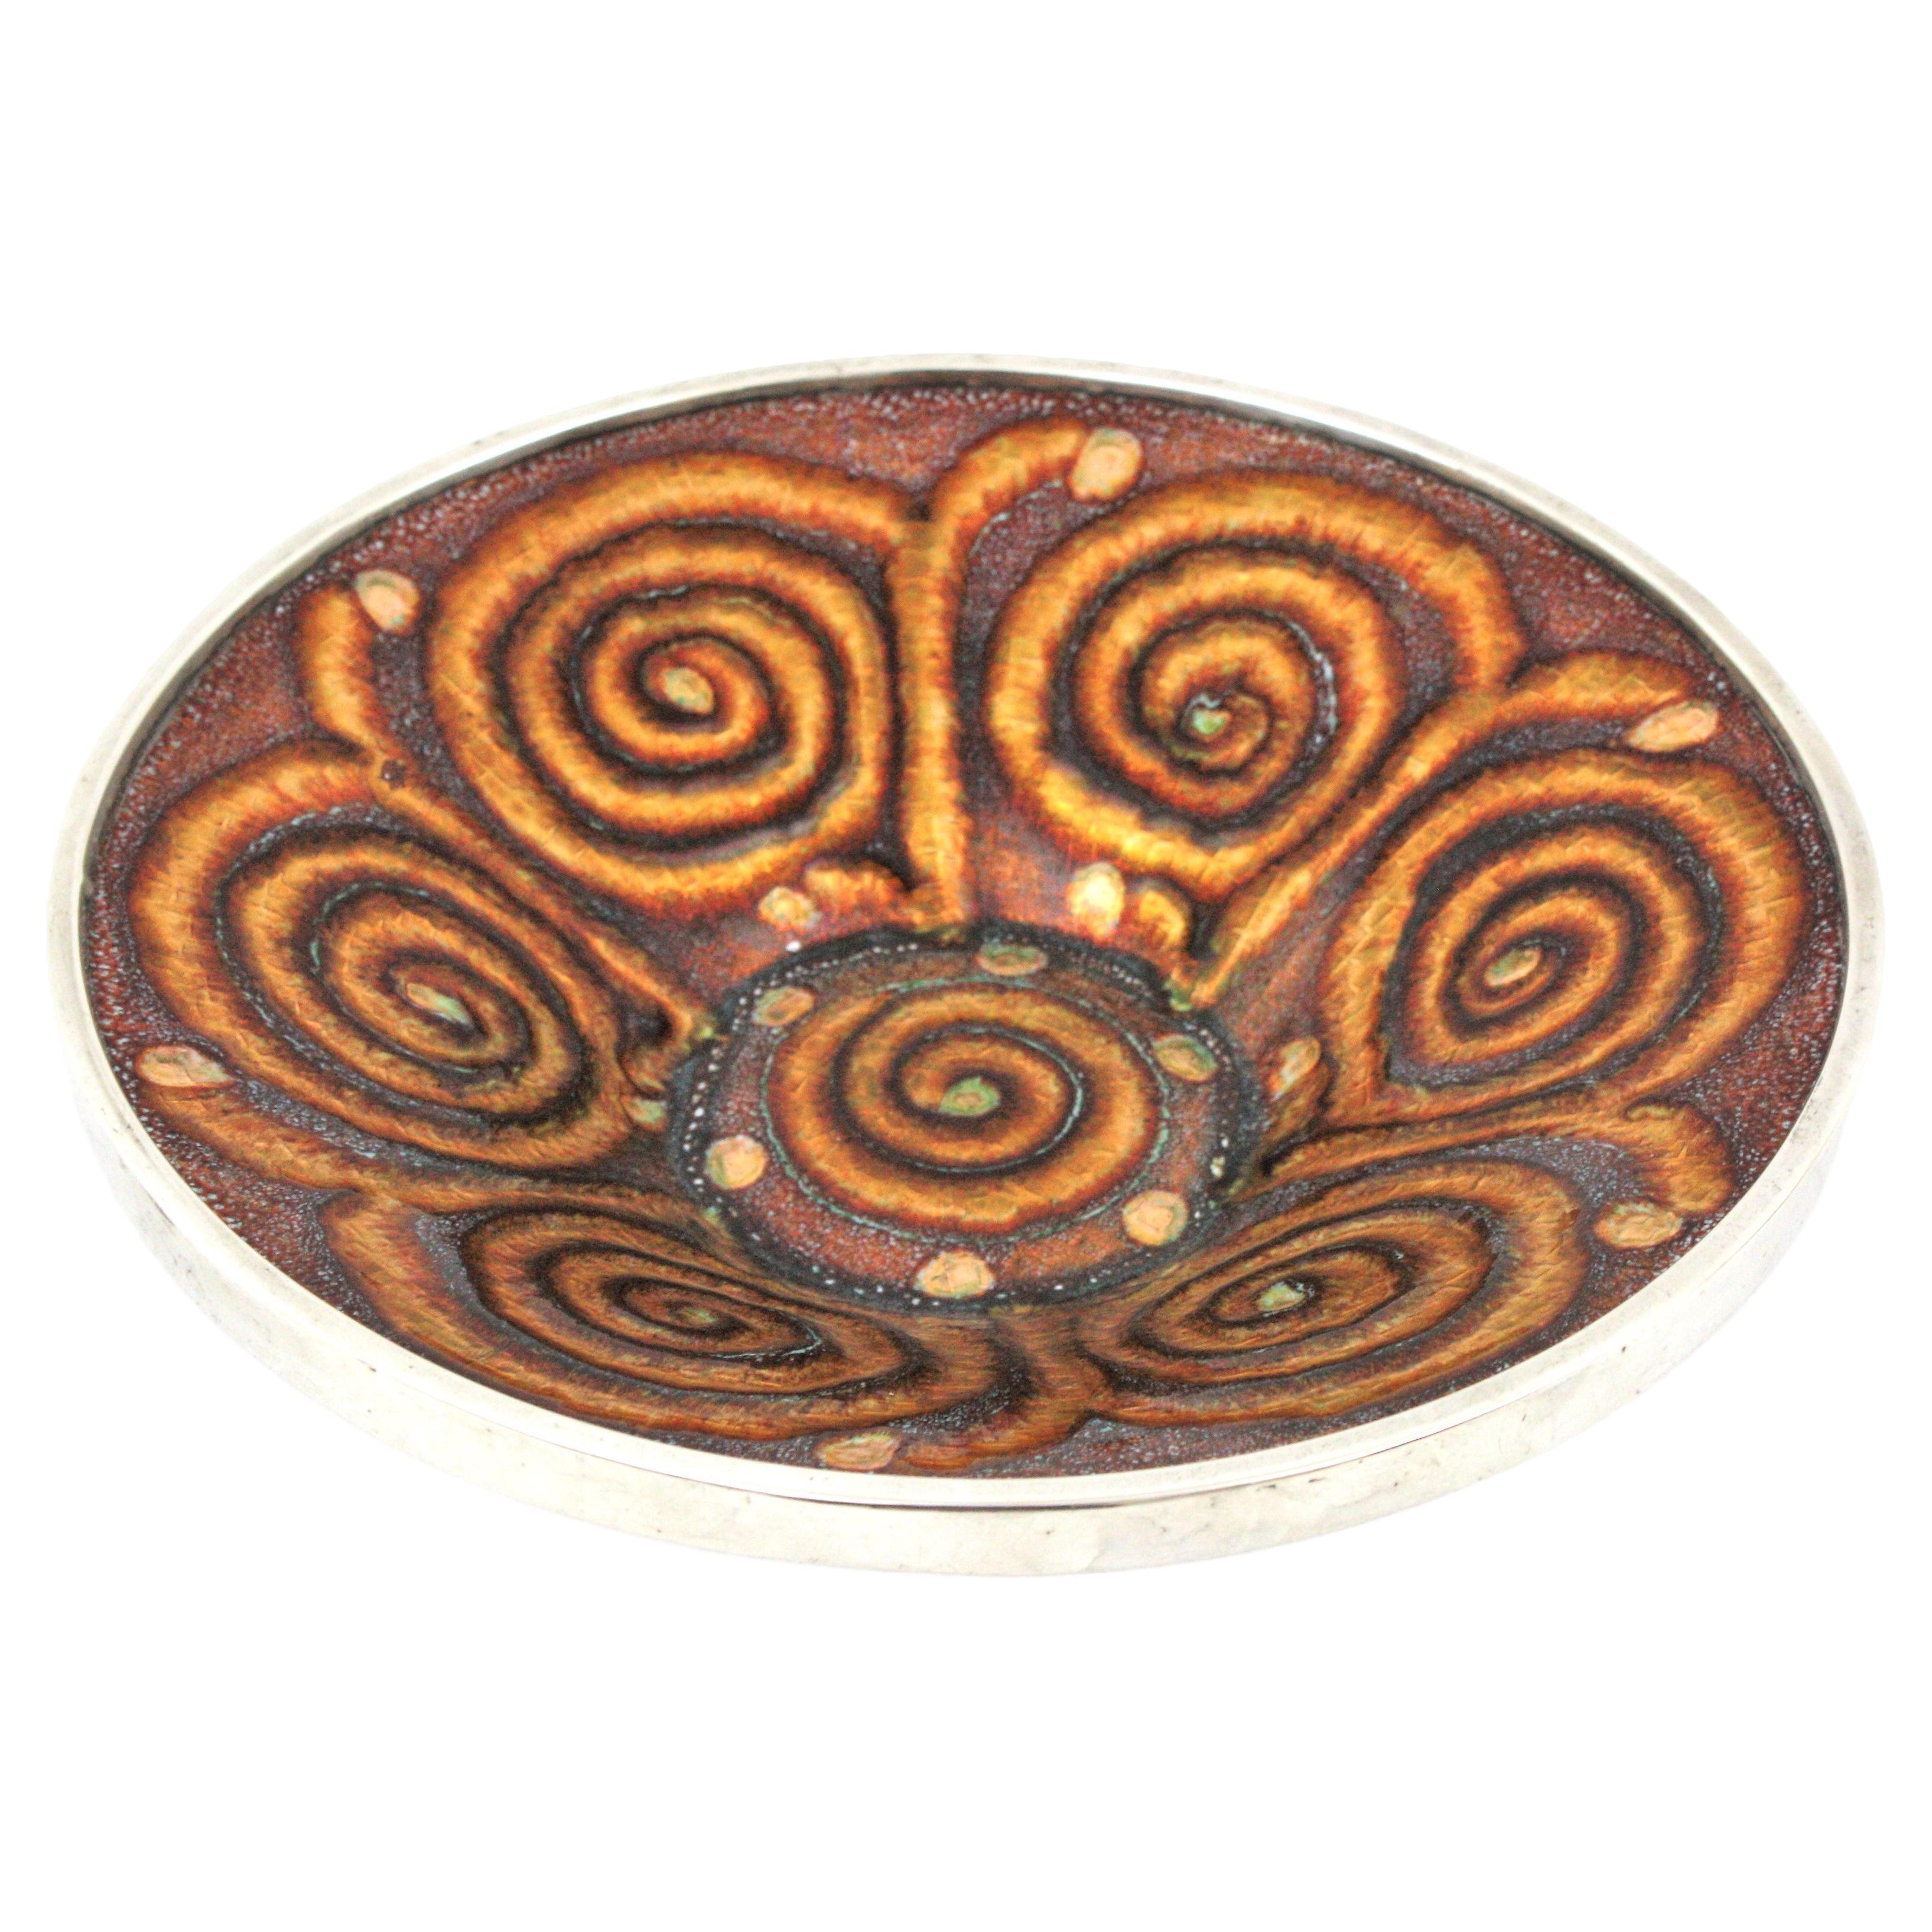 Enamel and Sterling Silver Midcentury Footed Bowl, Spain, 1950s
Exquisite enamel dish with colorful vibrant glaze made in the Mid-20th century period. 
Eye-catching design with spirals in golden, amber and brown shades and blue enamel at the back